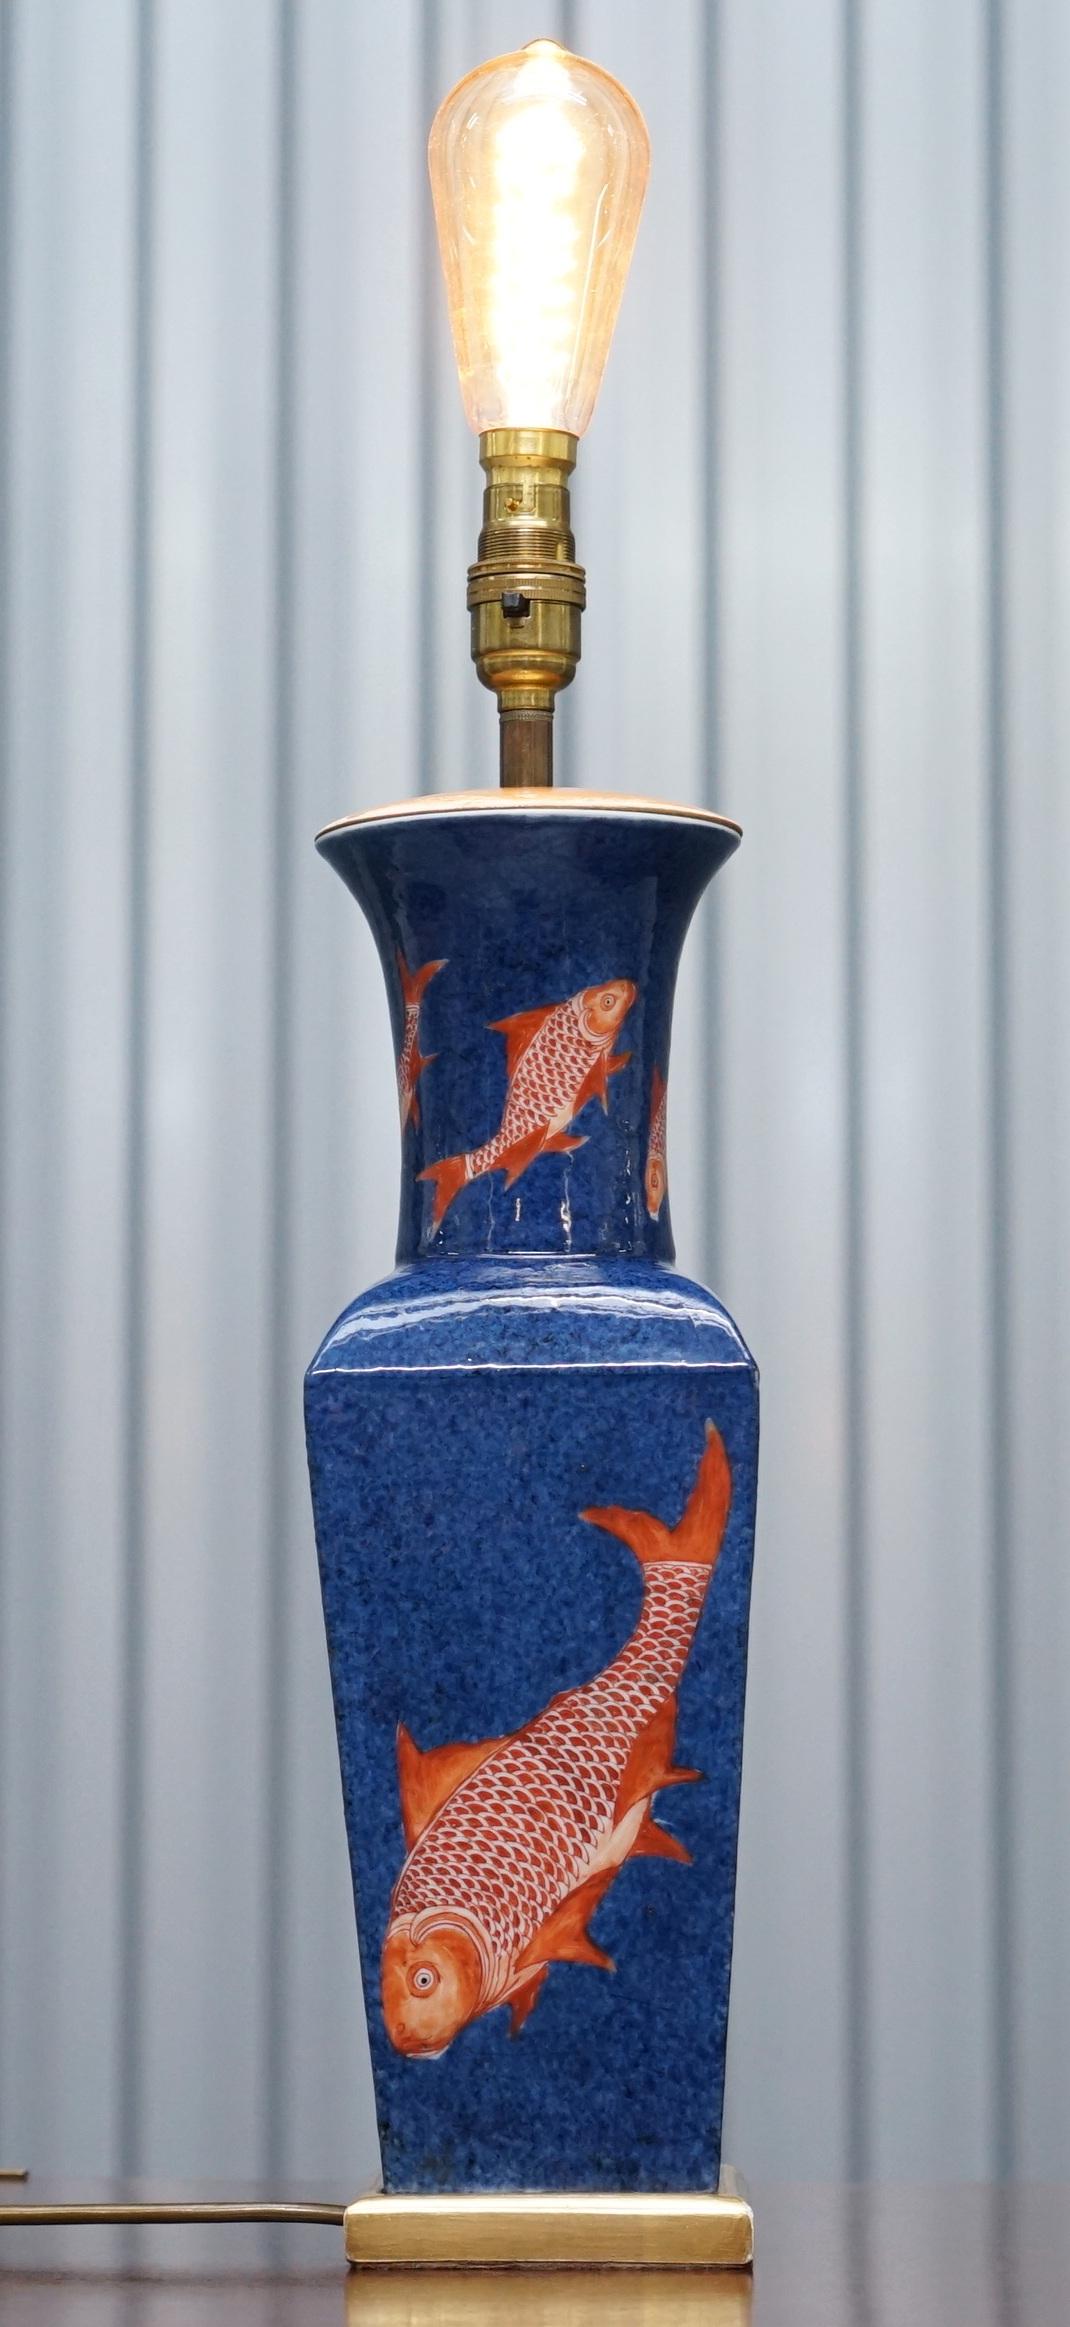 We are delighted to offer for sale this exceptionally rare Kangxi period circa 1662-1722 Chinese carp Powder blue ground iron red gilt vase converted to a lamp by the antiques department of Asprey Bond street in the 1970s

These vases are highly